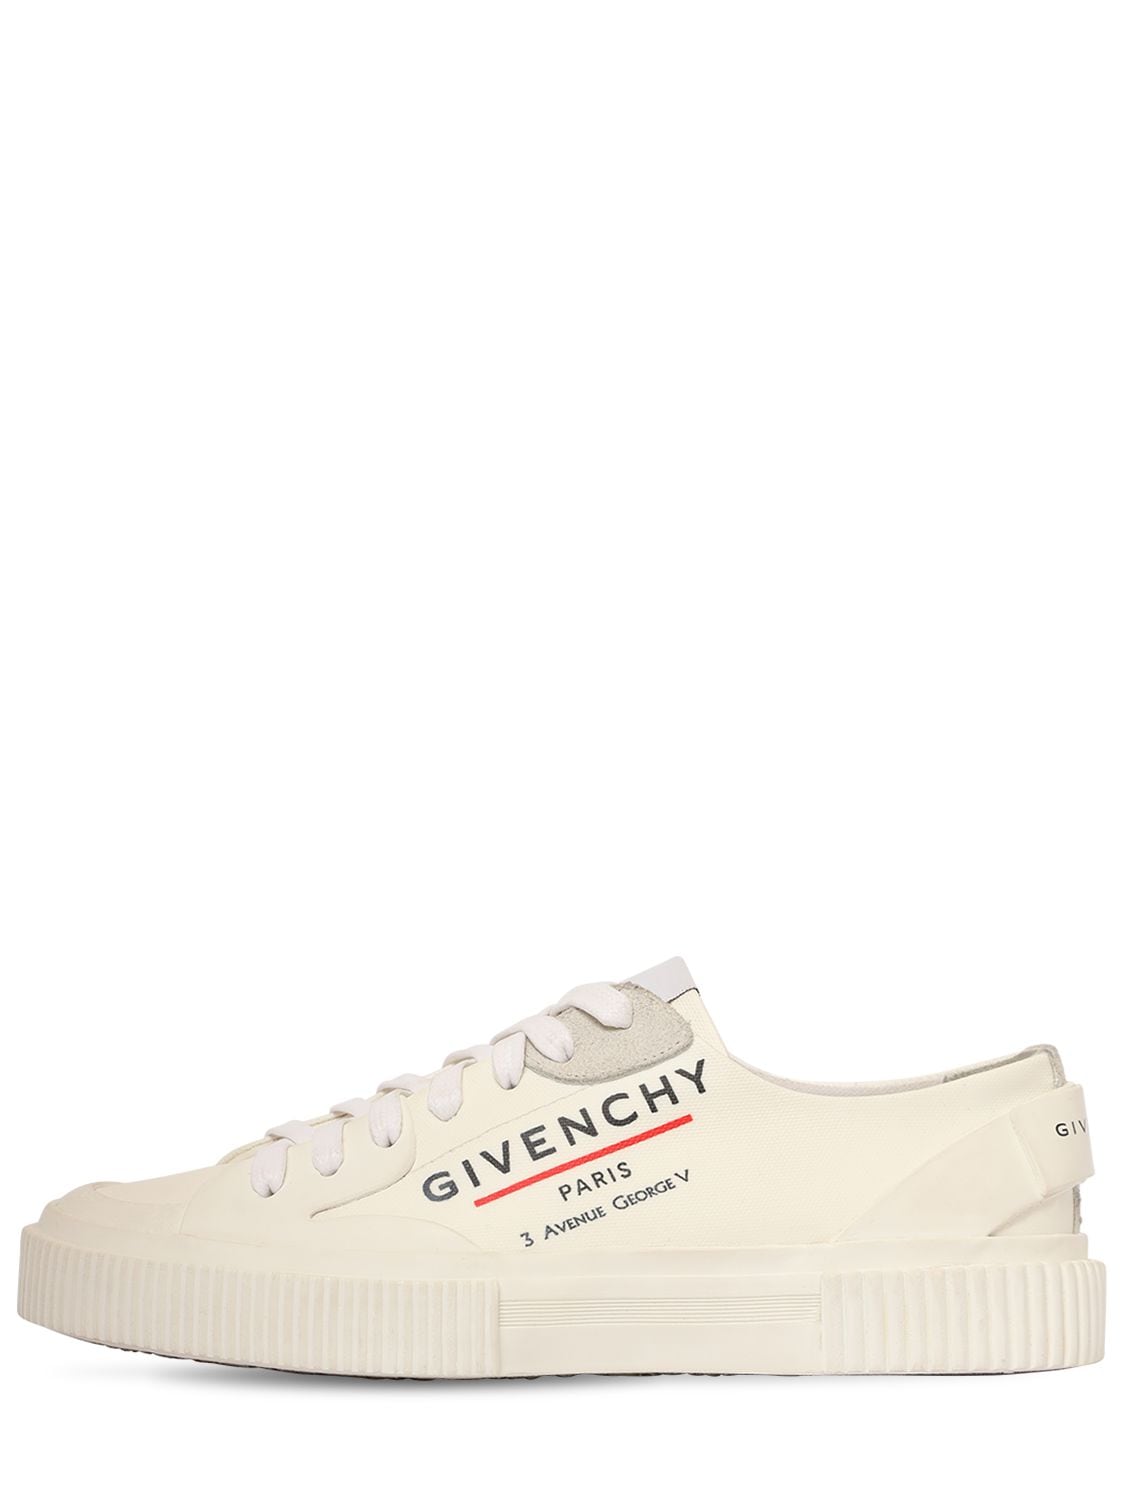 Givenchy 10毫米“tennis”轻薄棉质帆布运动鞋 In White